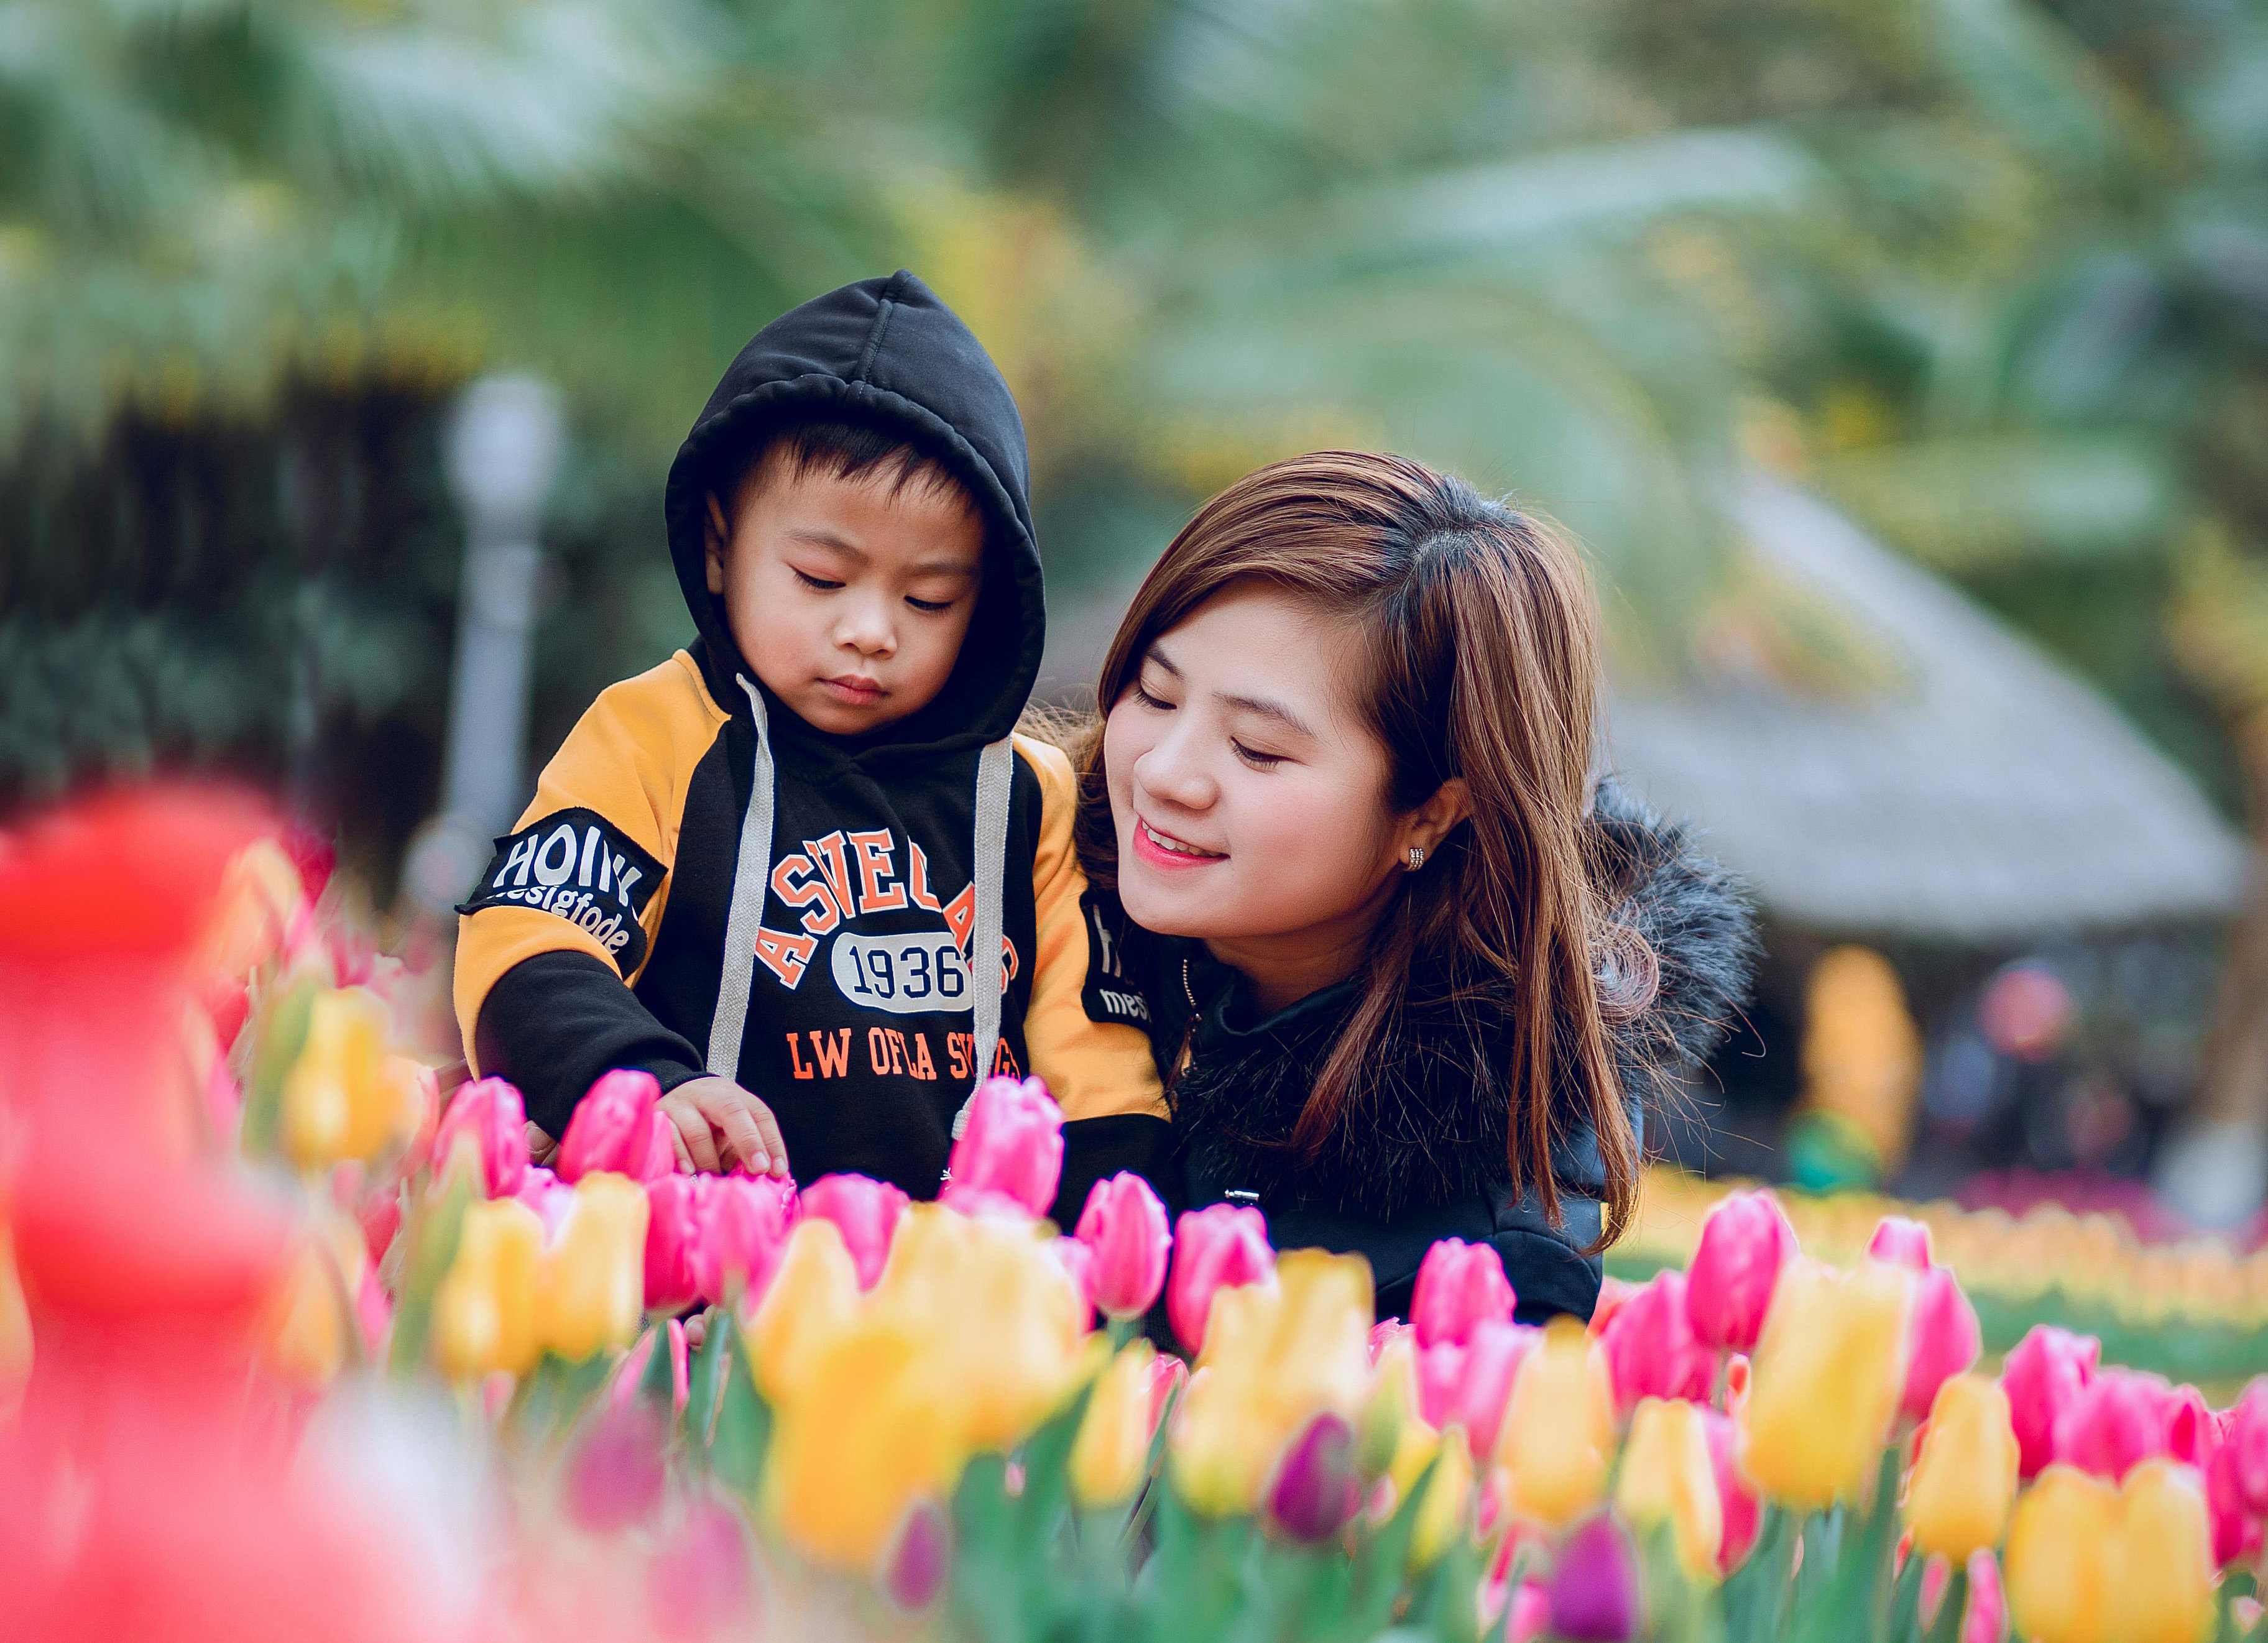 A woman and child are looking at a bed of tulips together